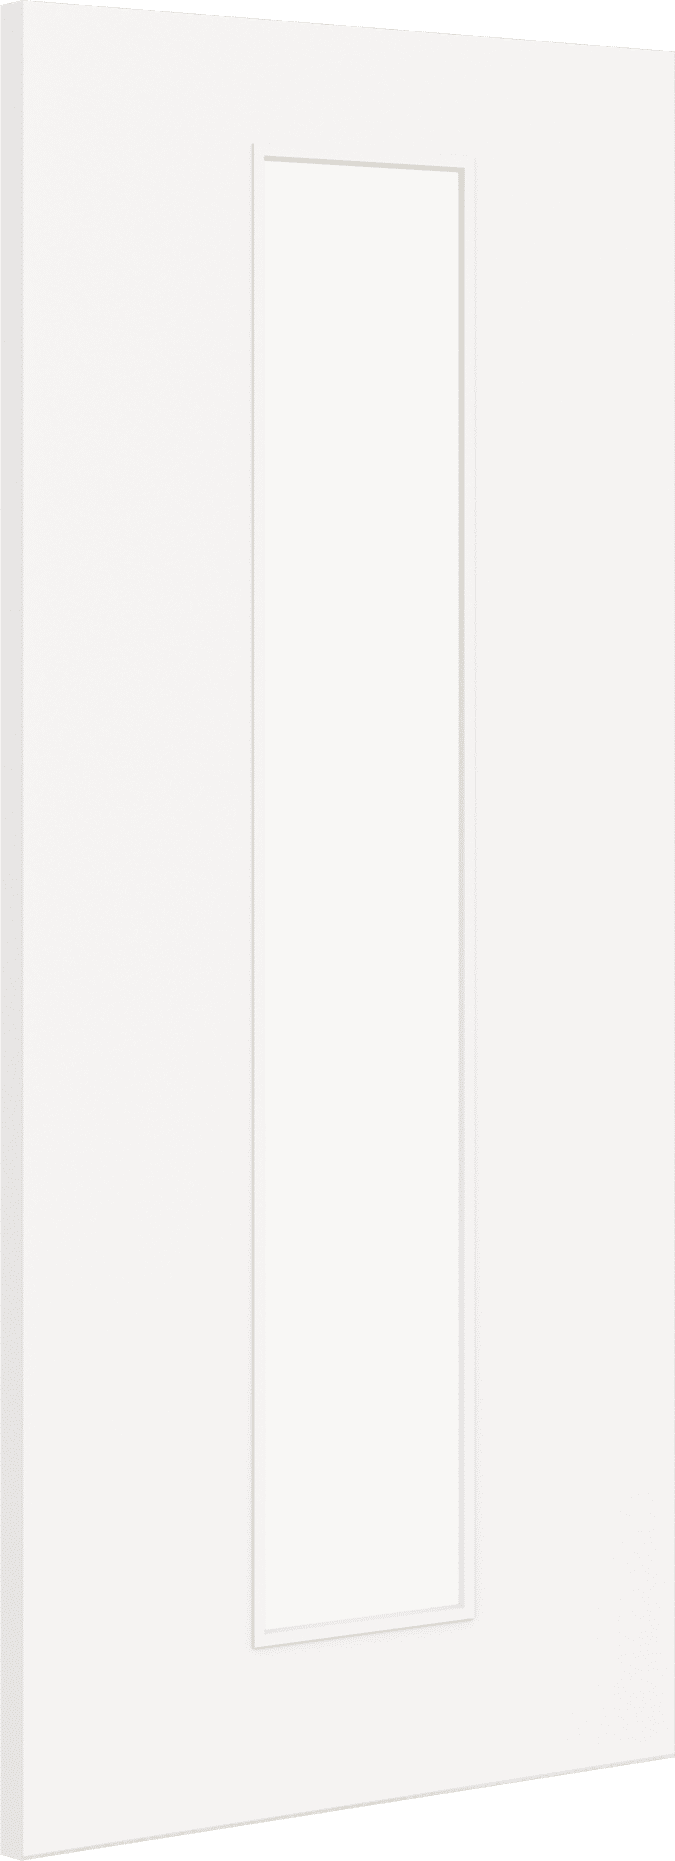 1981mm x 914mm x 44mm (36") Architectural Paint Grade White 10 Frosted Glazed Fire Door Blank